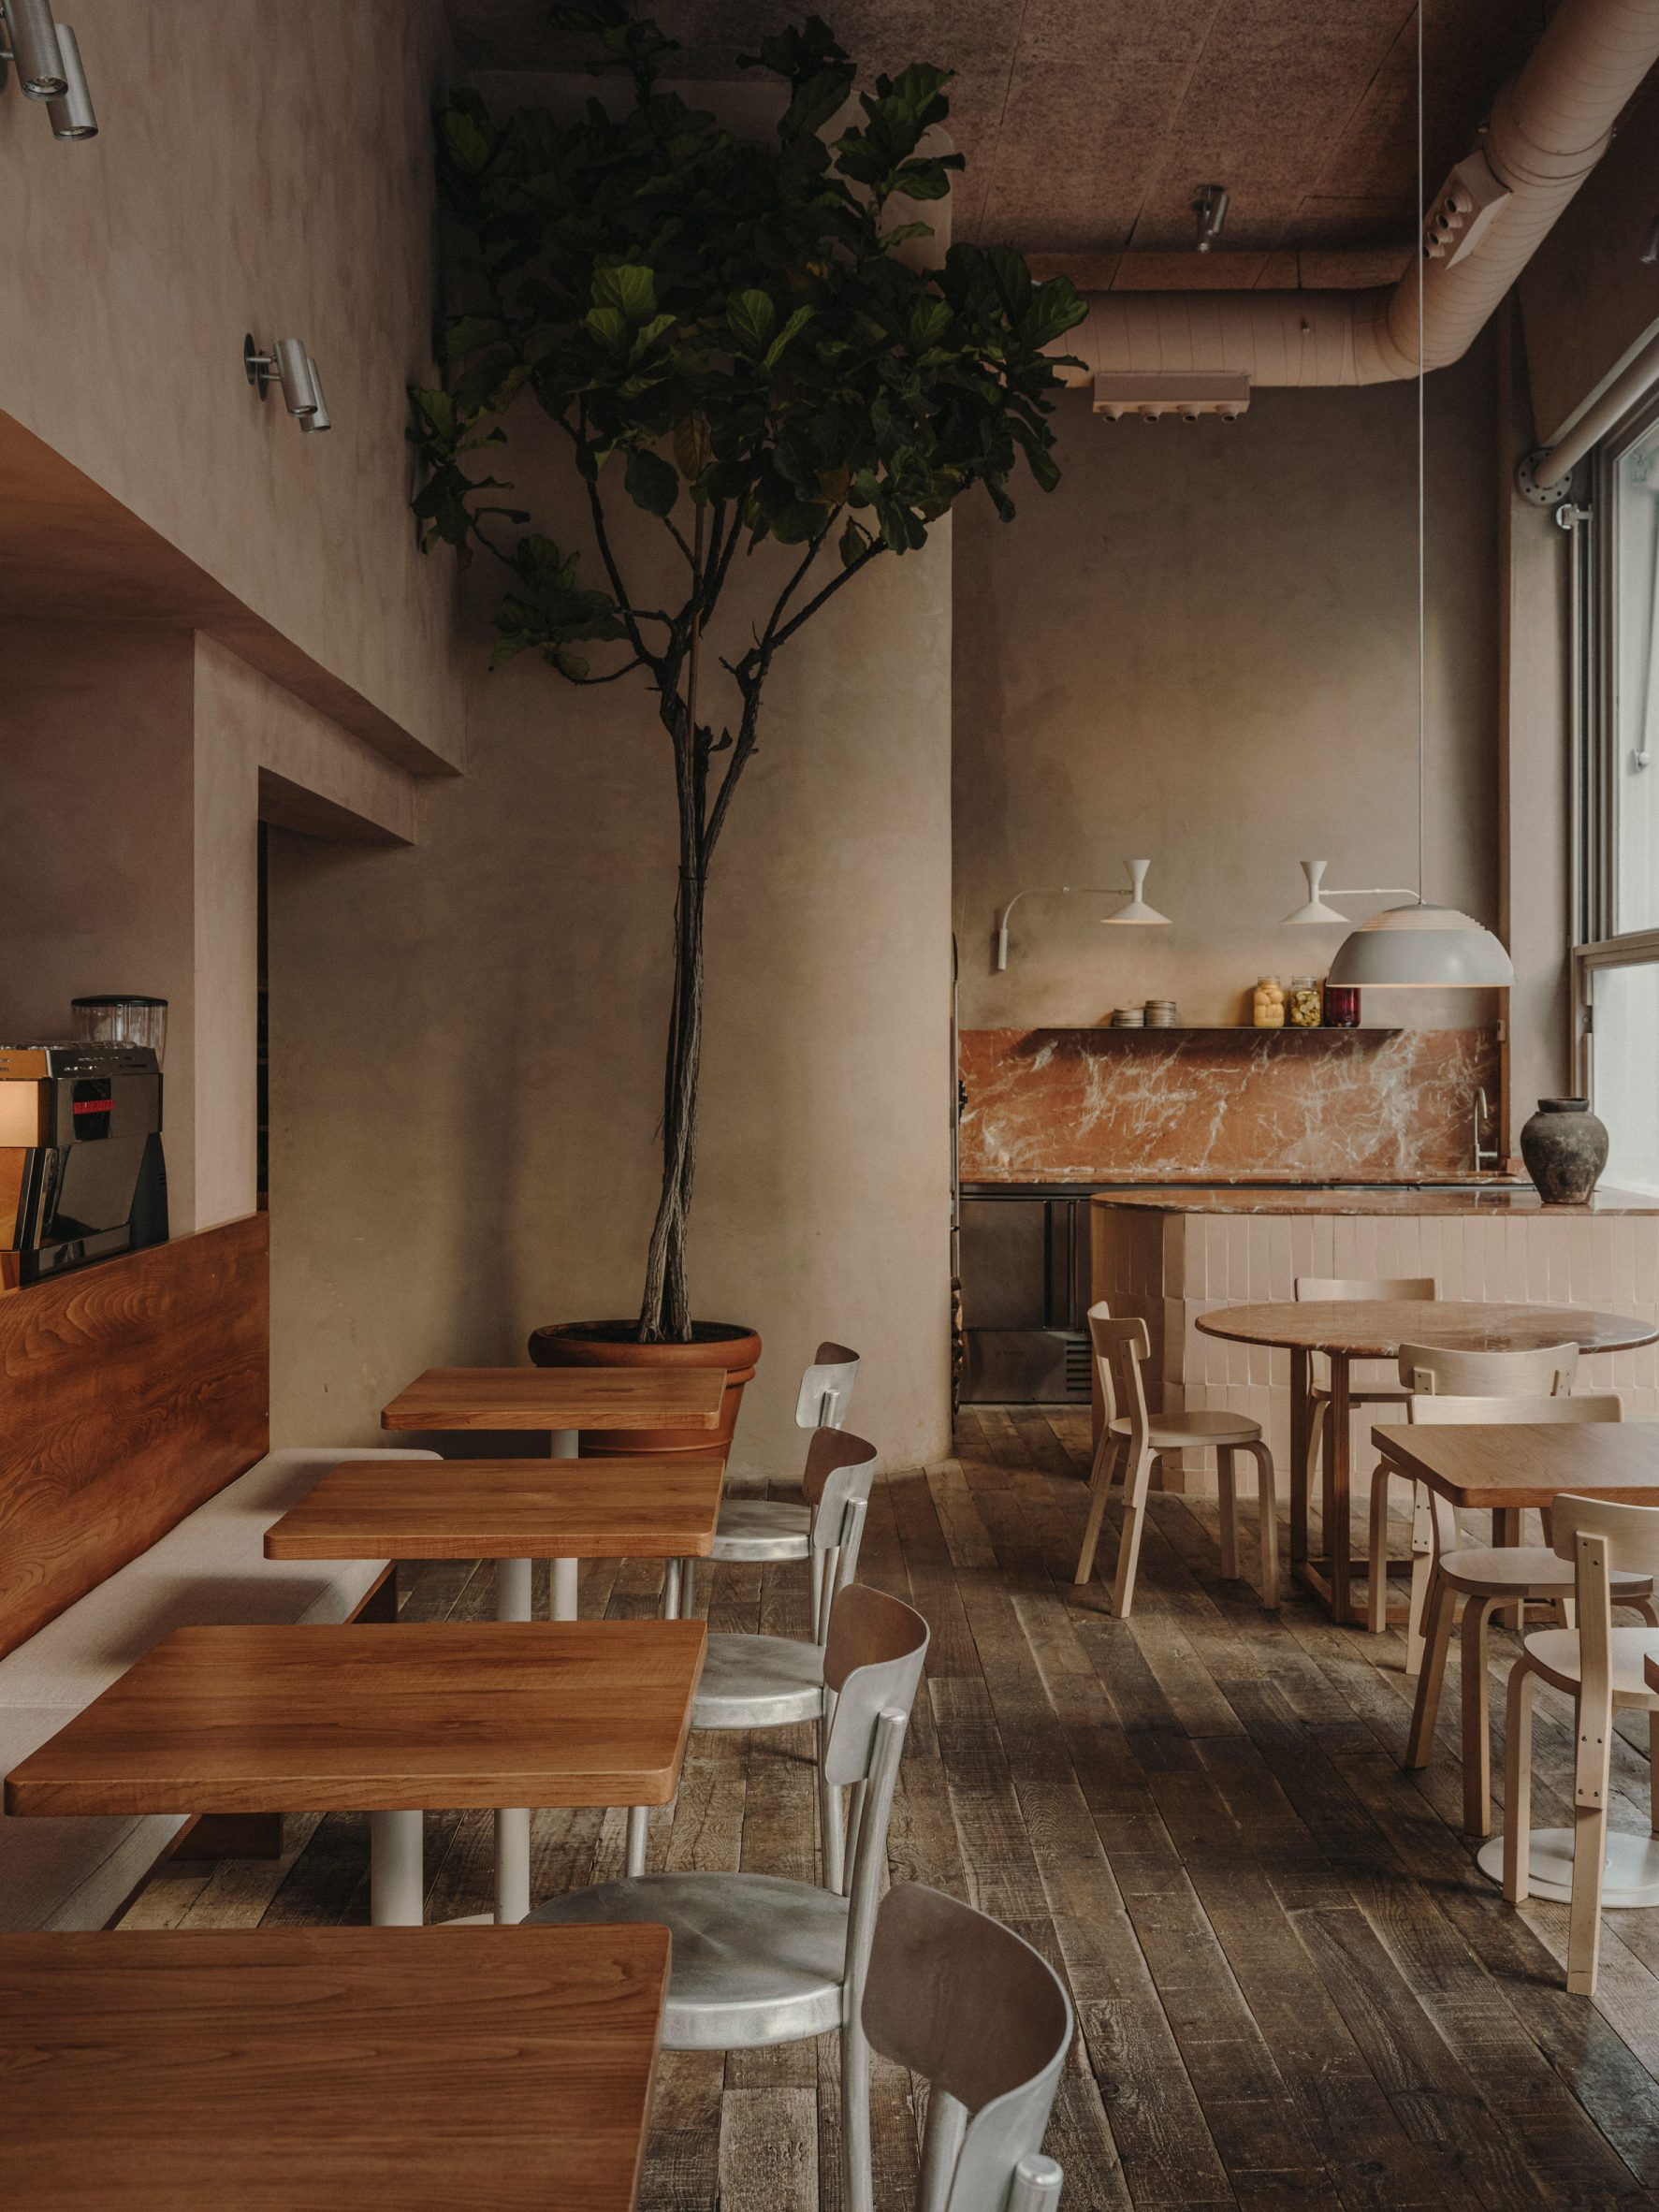 Seating area of a Madrid restaurant by Plantea Estudio with a fig tree and wood and aluminium furniture